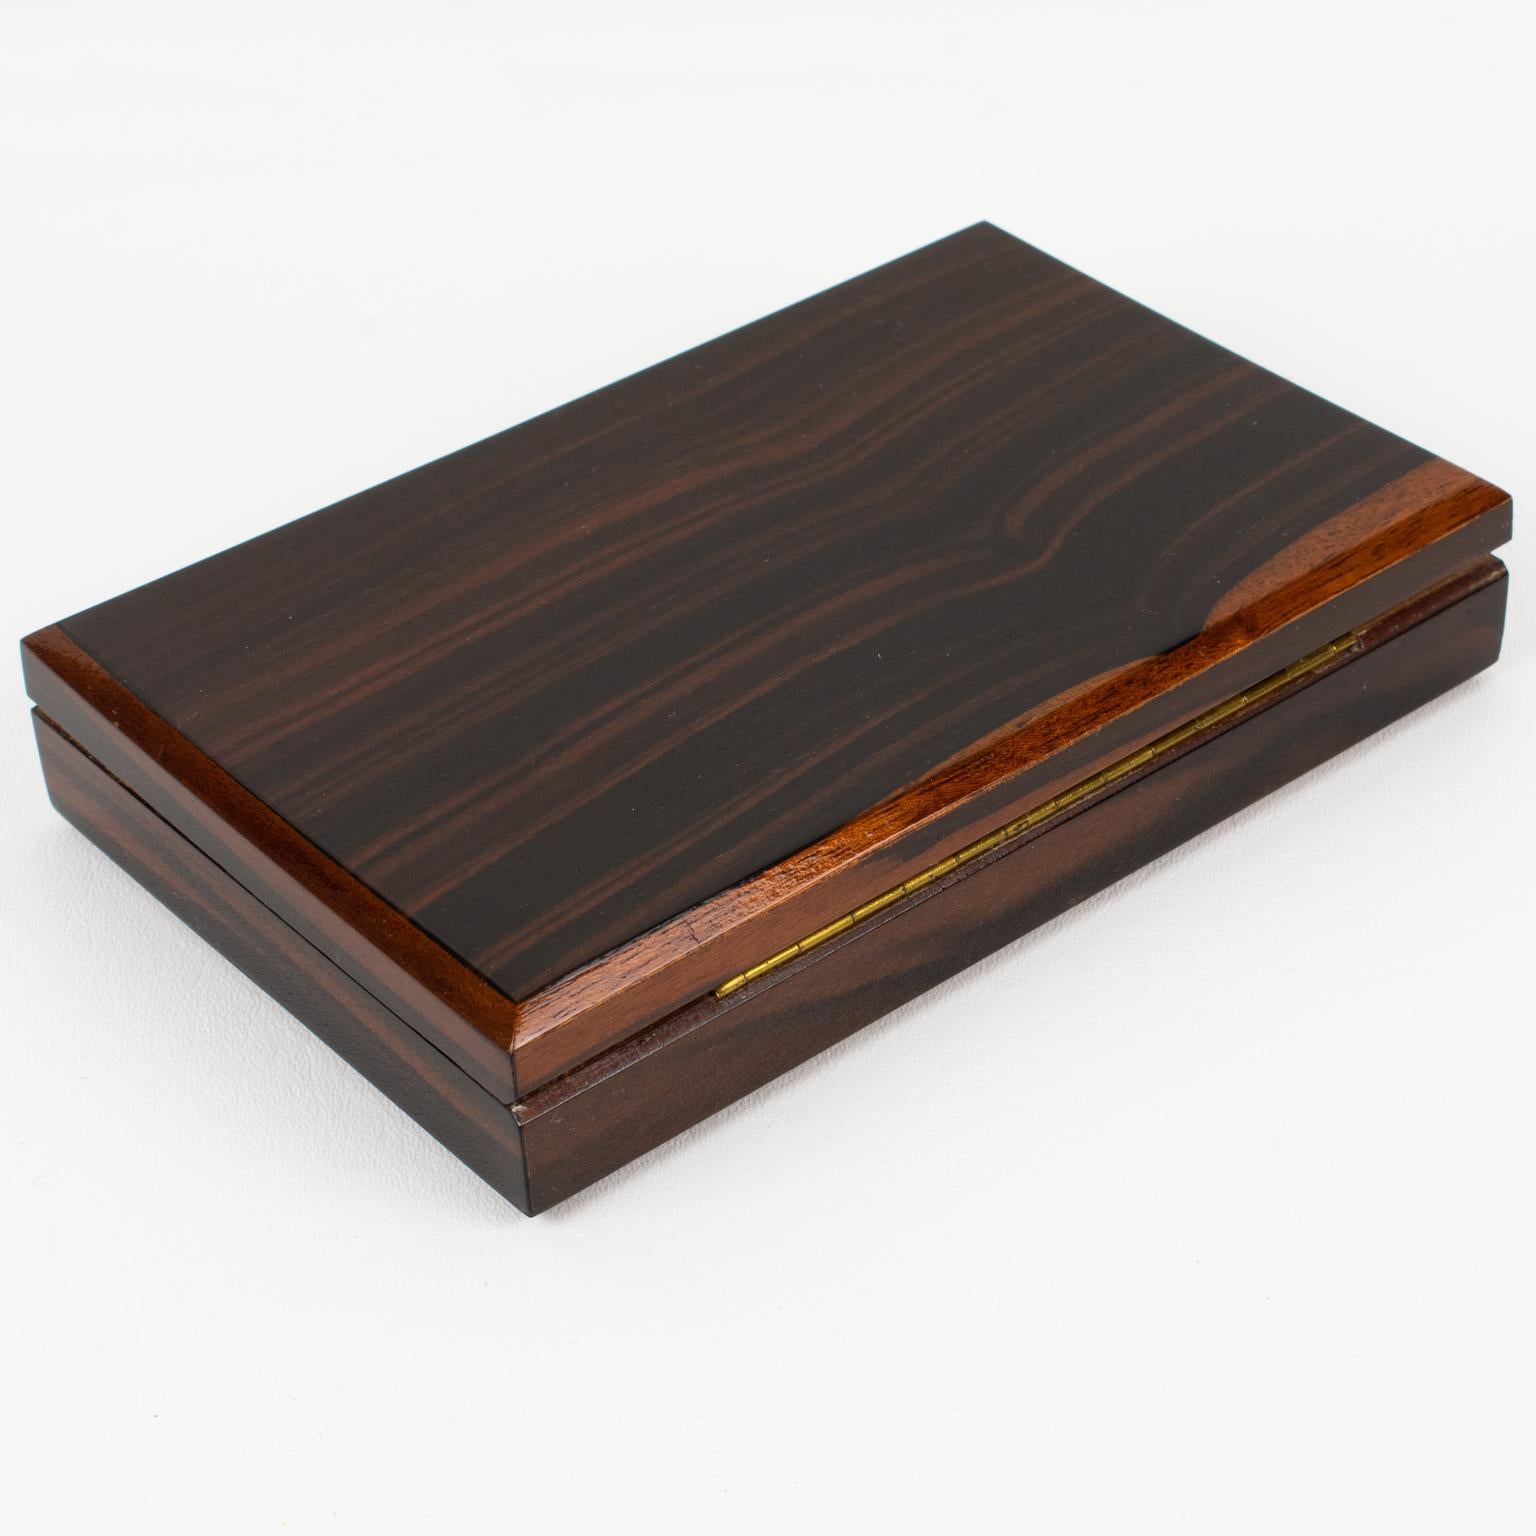 French Art Deco Macassar Wood Decorative Lidded Box, 1930s For Sale